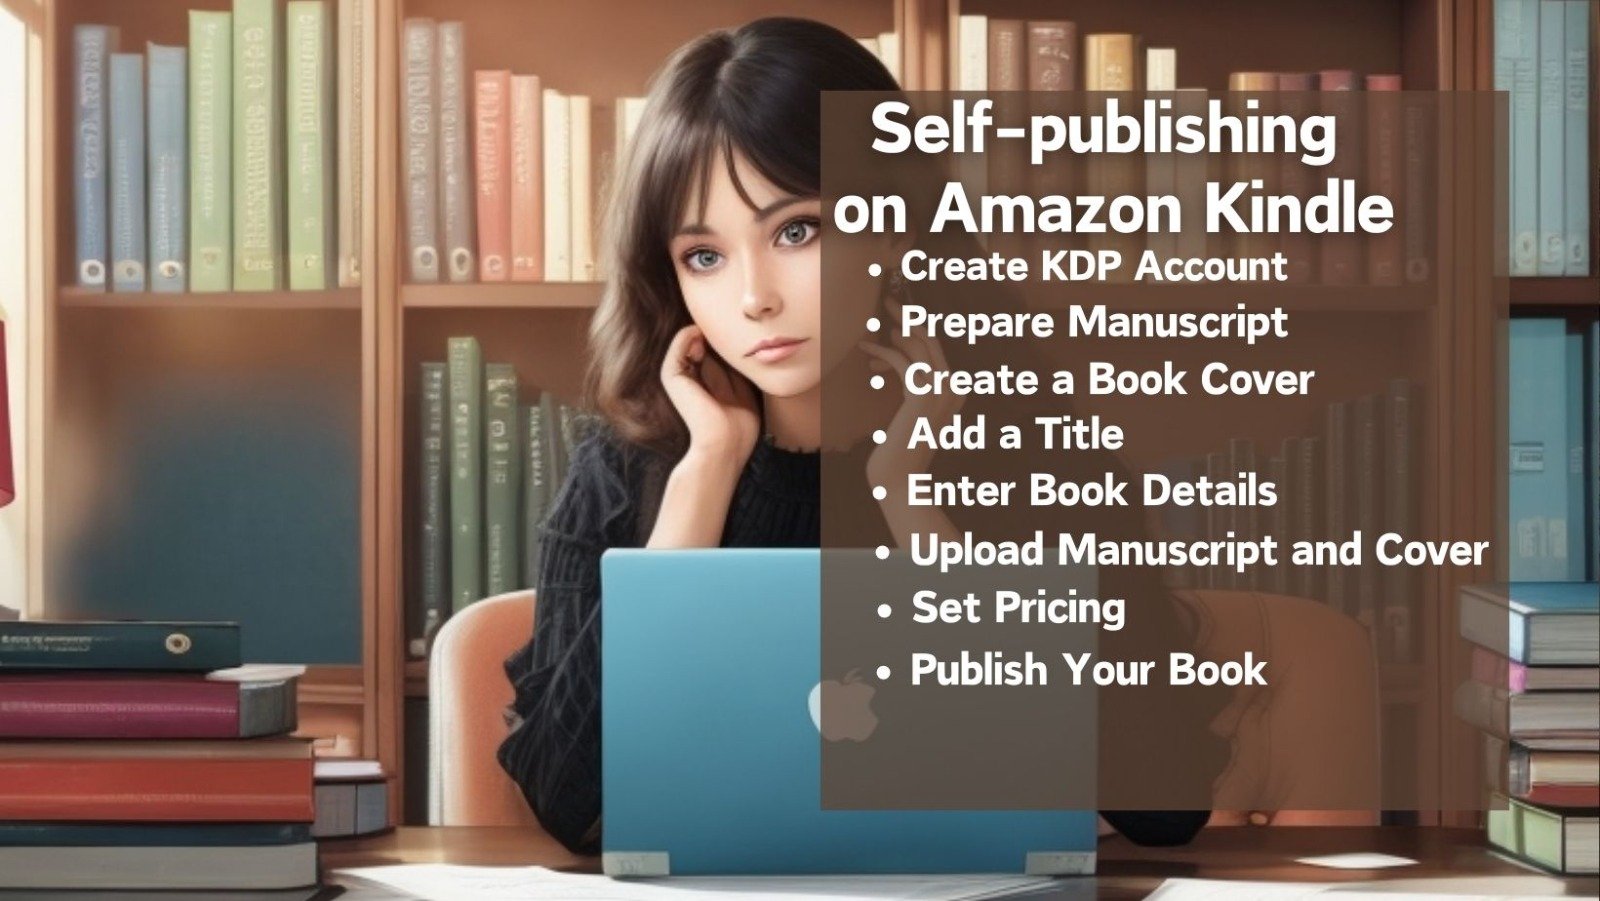 Self-publishing on Amazon Kindle #Step-by-step Guide